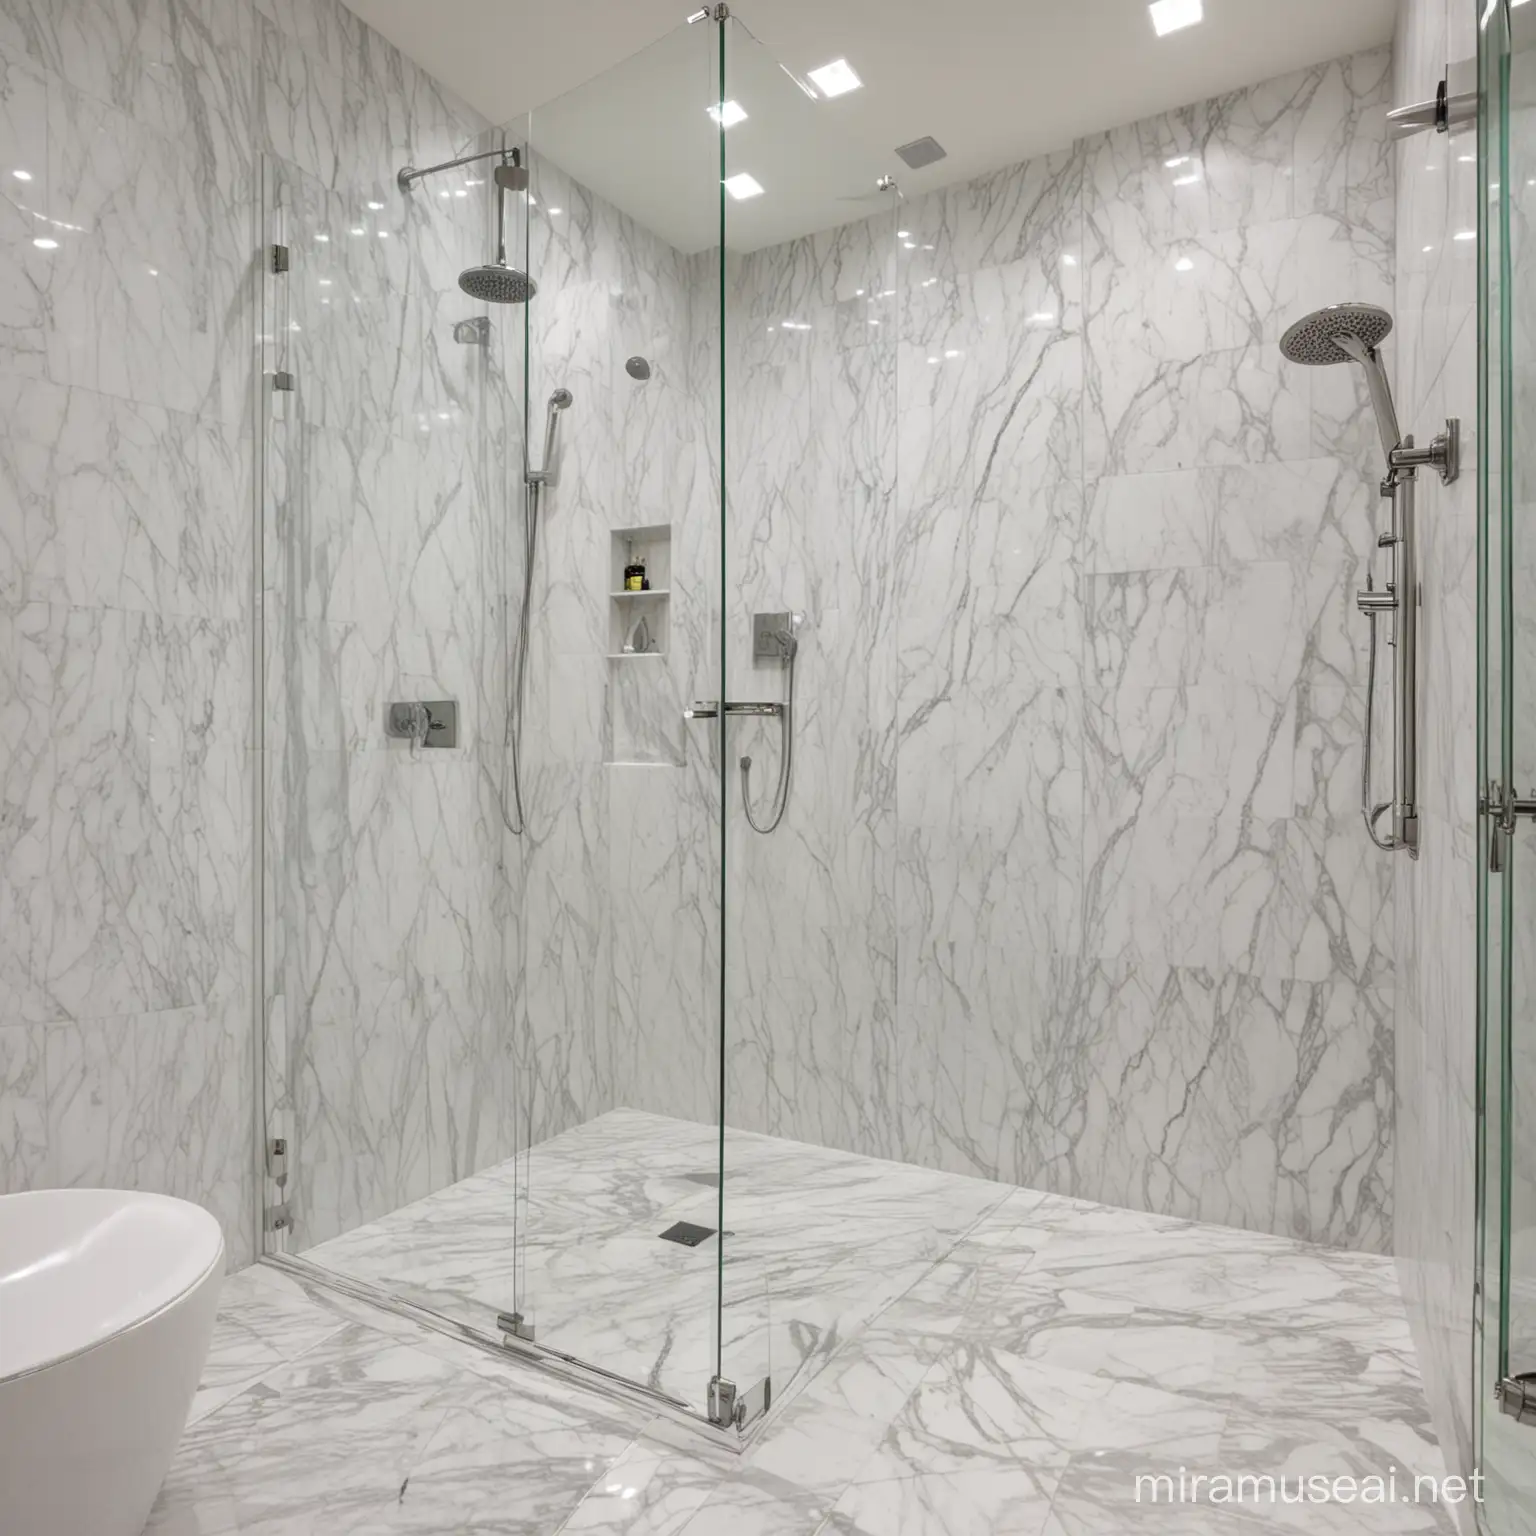 Luxurious Carrara Marble Shower Wall with Continuous Veining